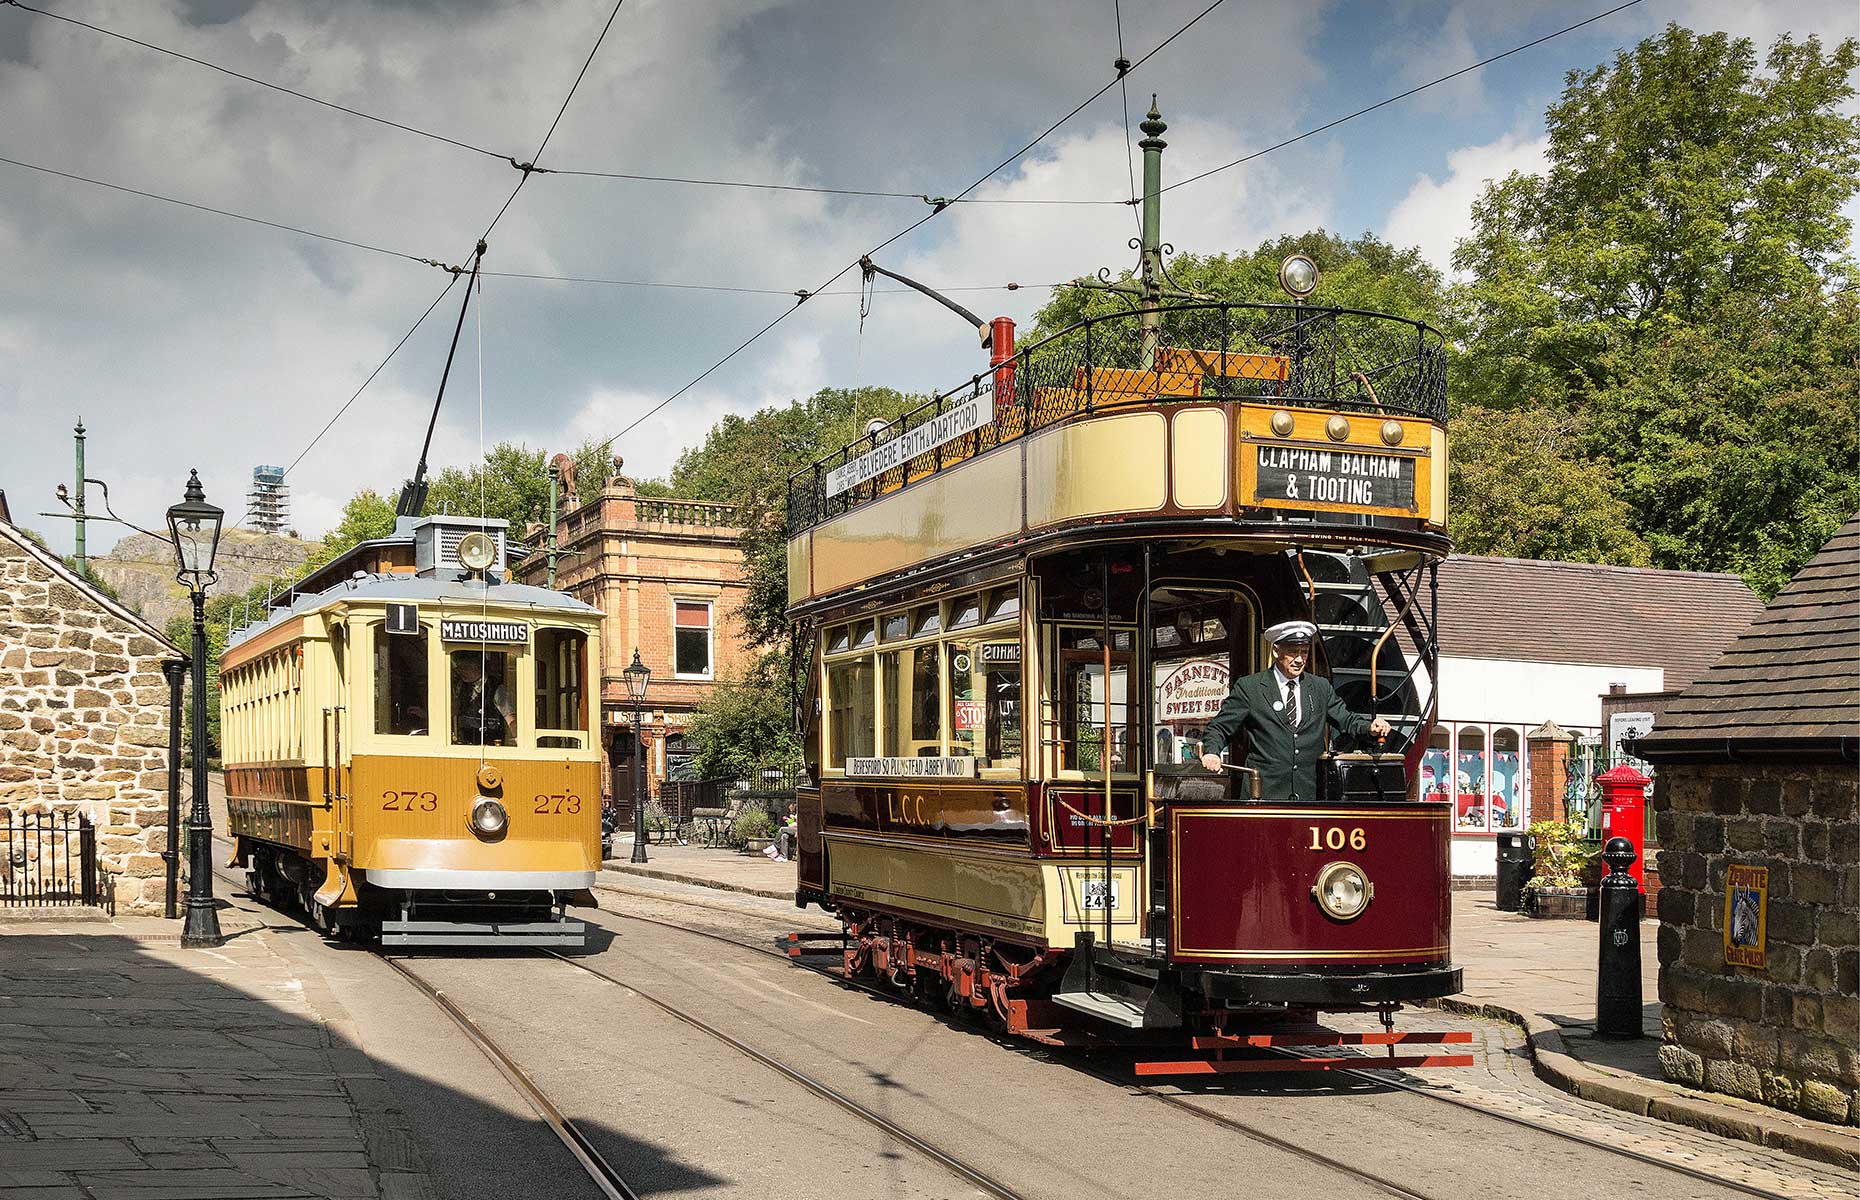 (Image: Courtesy of Crich Tramway Village)